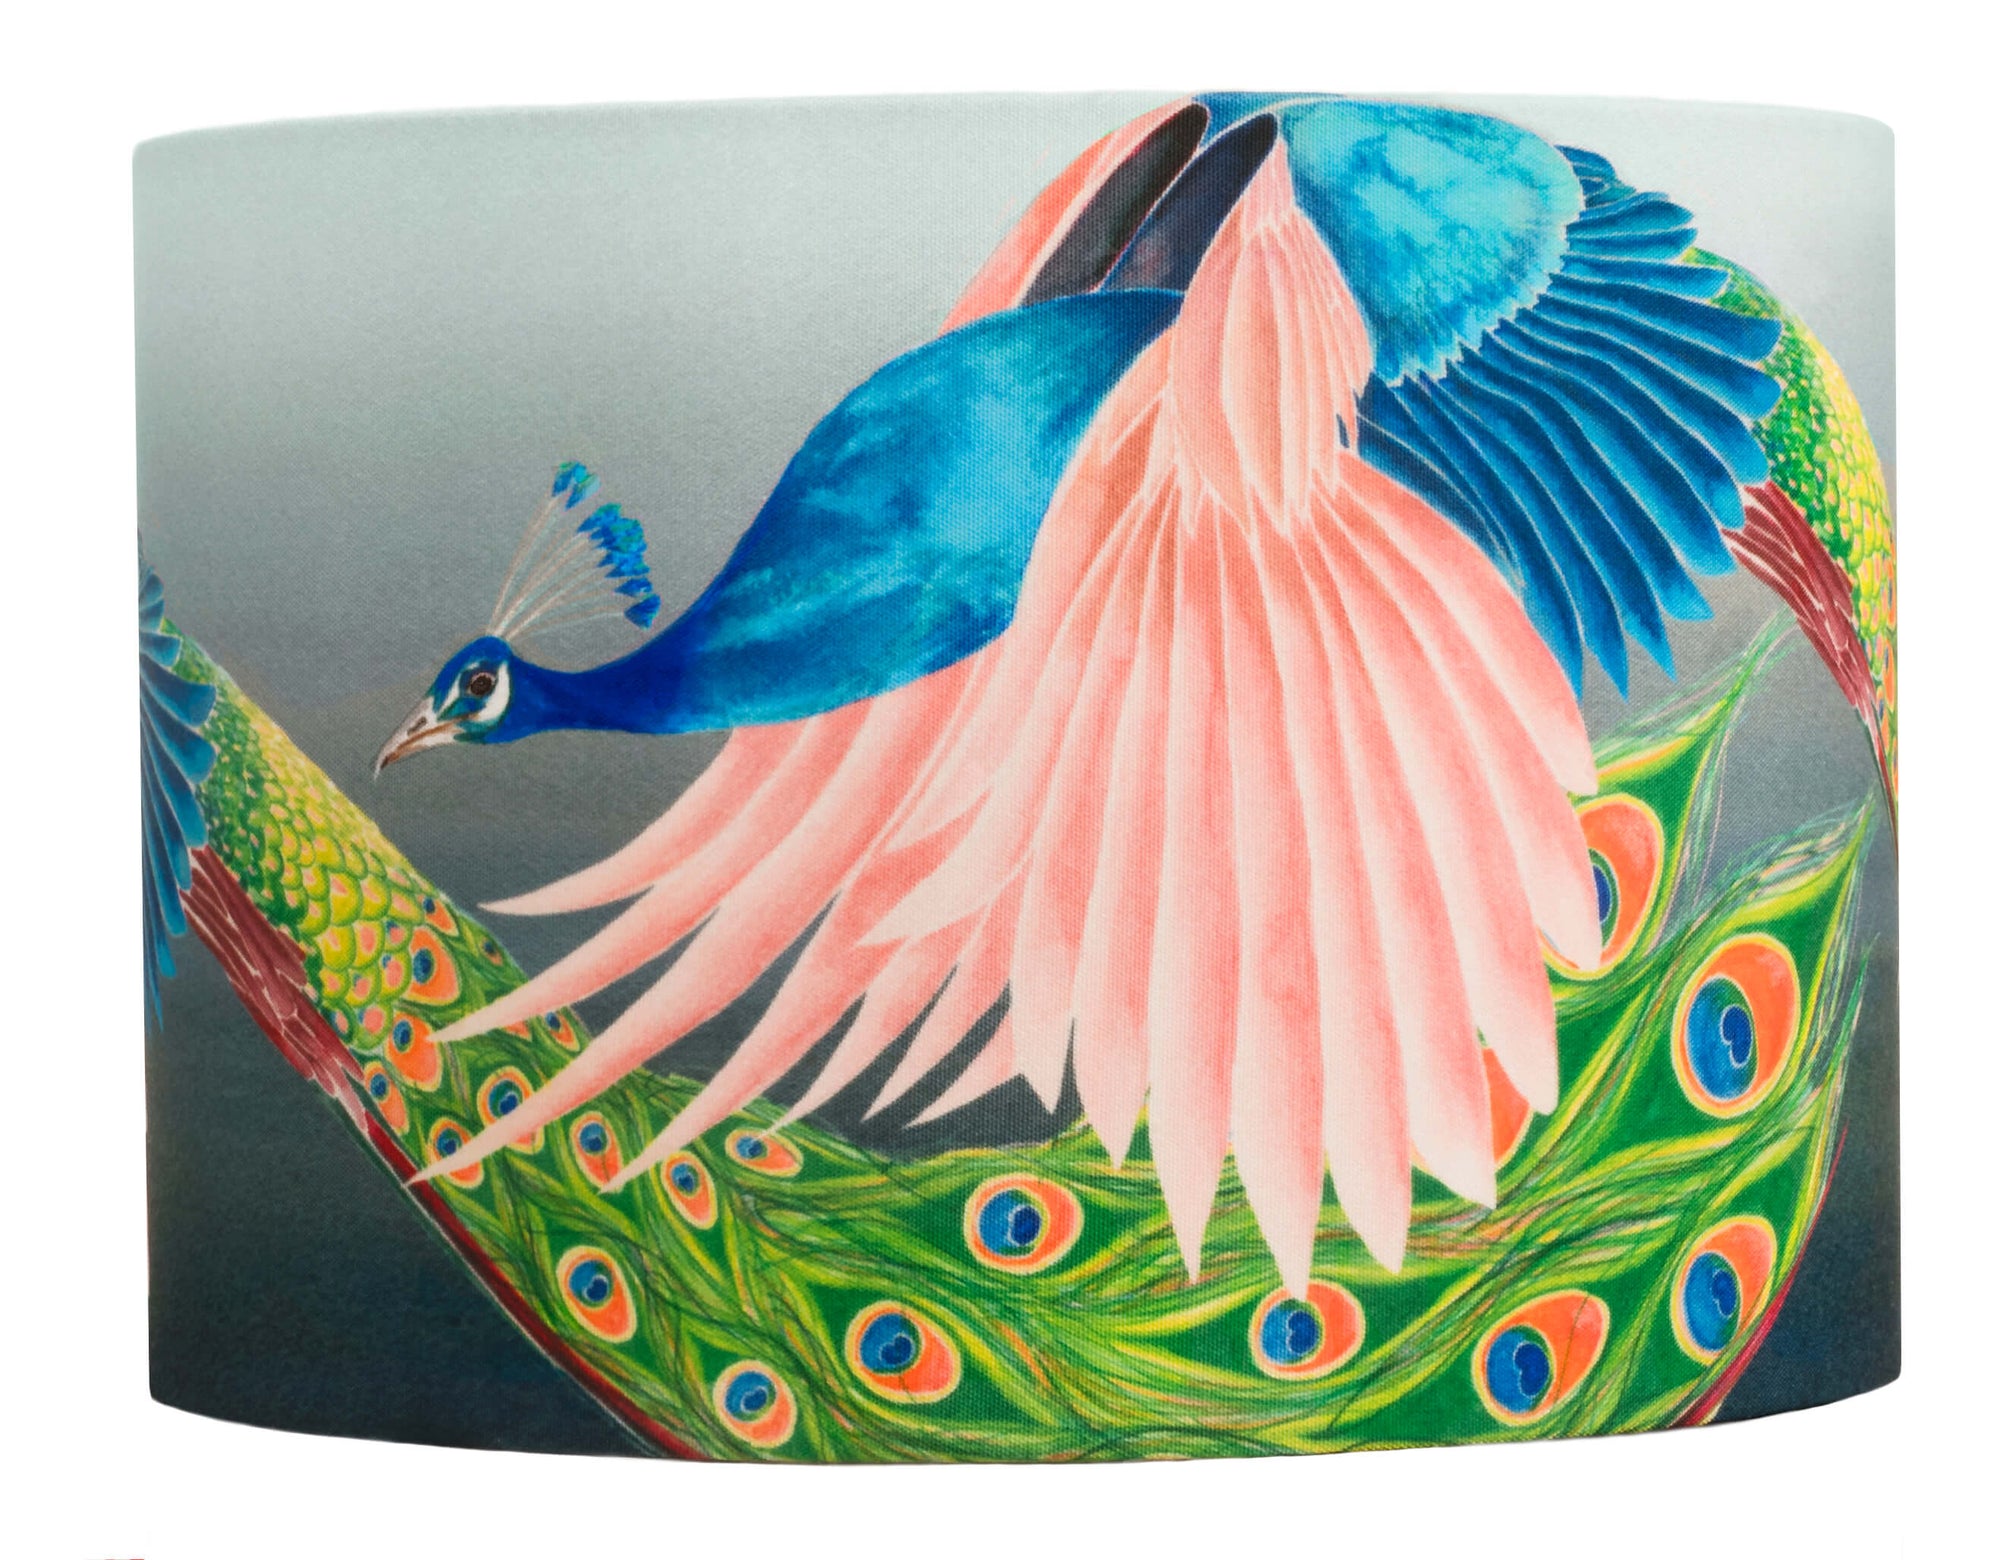 Peacock lampshade by Anna Jacobs - Flying Peacock - medium size cut out